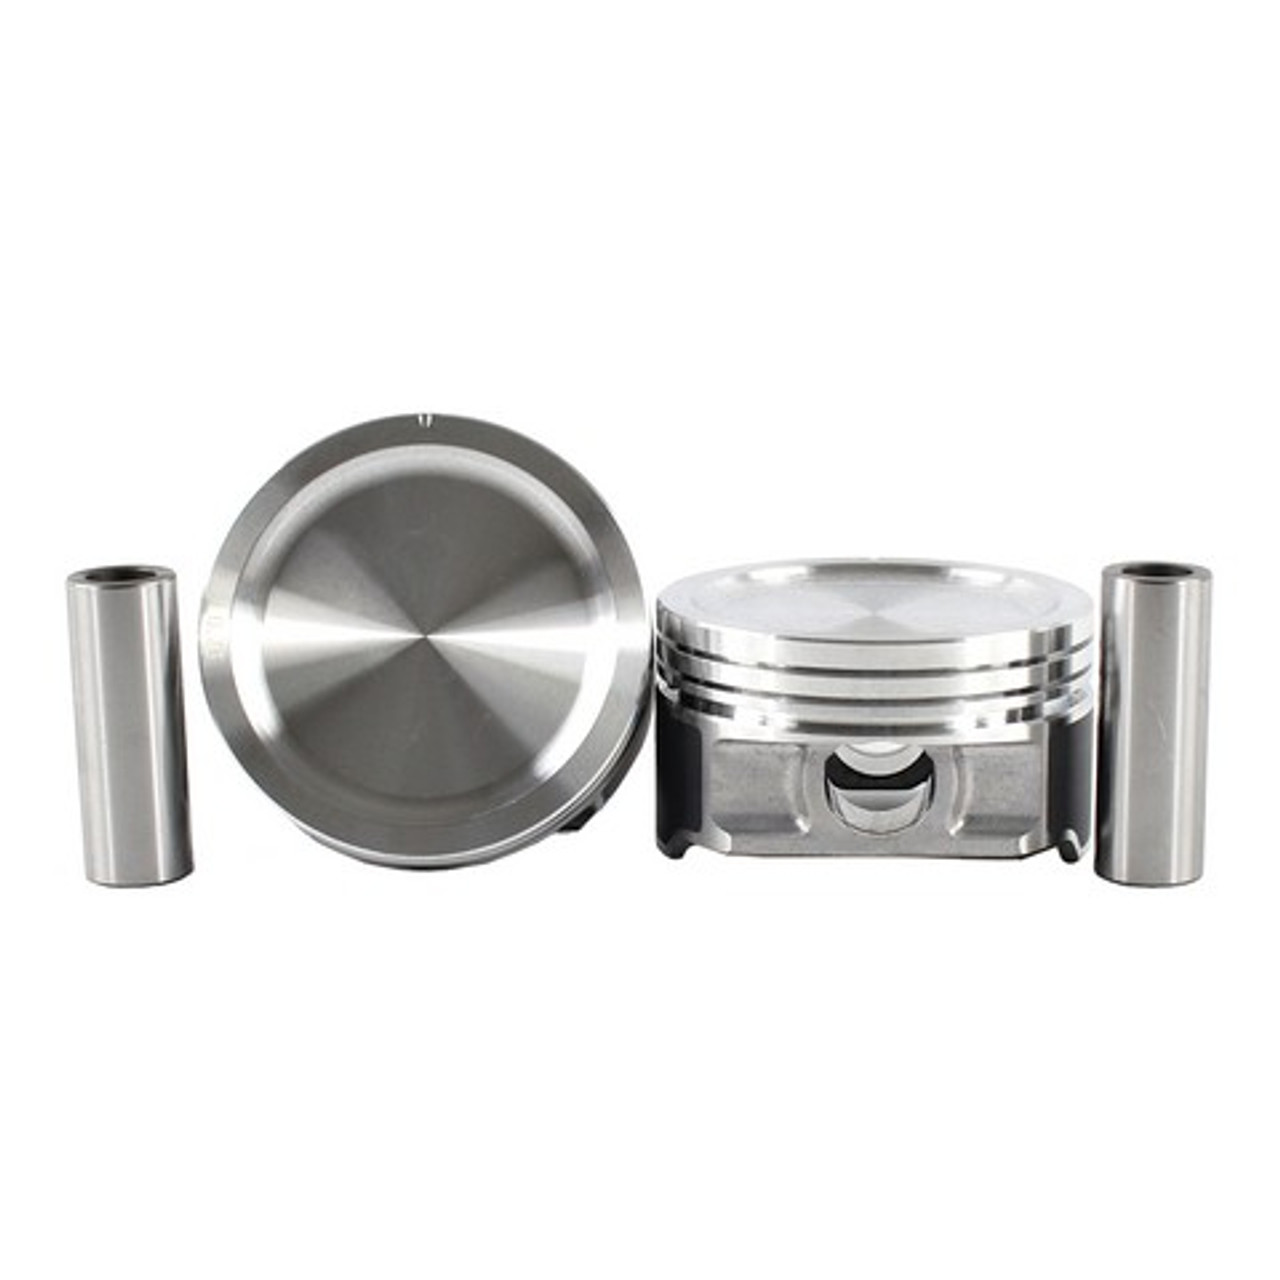 Piston Set 5.4L 1998 Ford Expedition - P4170.102